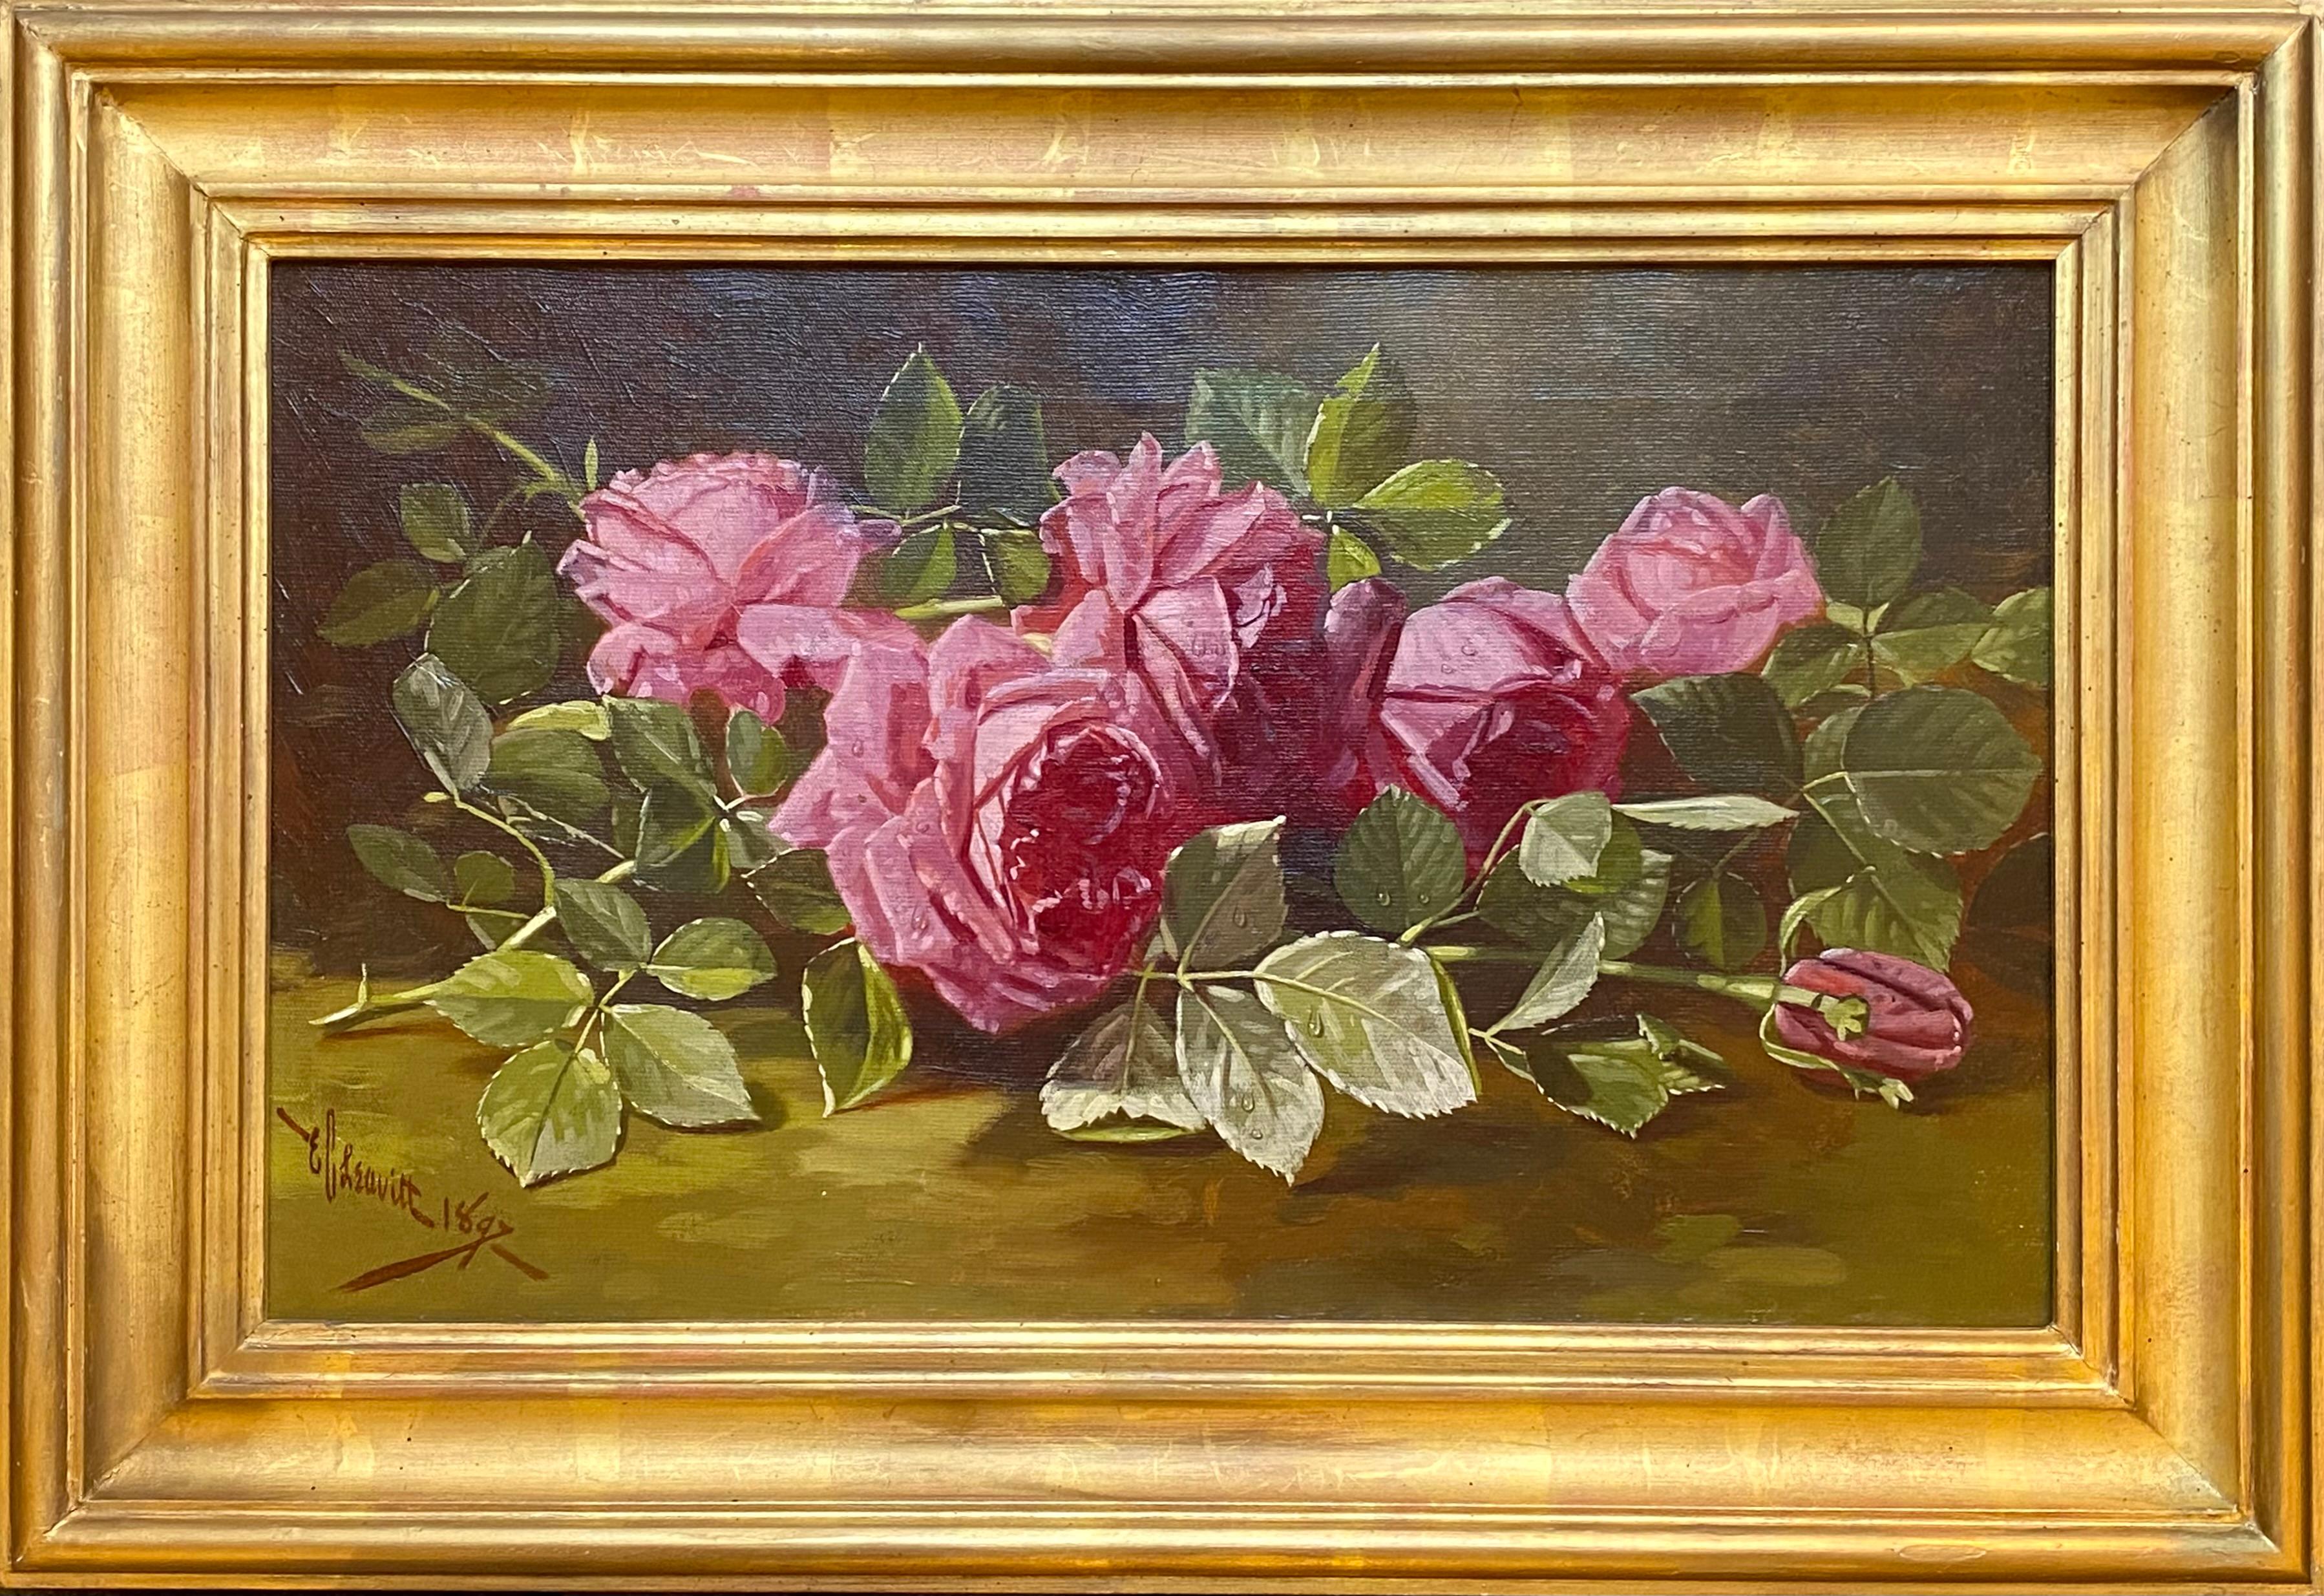 “Red Roses” - Painting by Edward Chalmers Leavitt